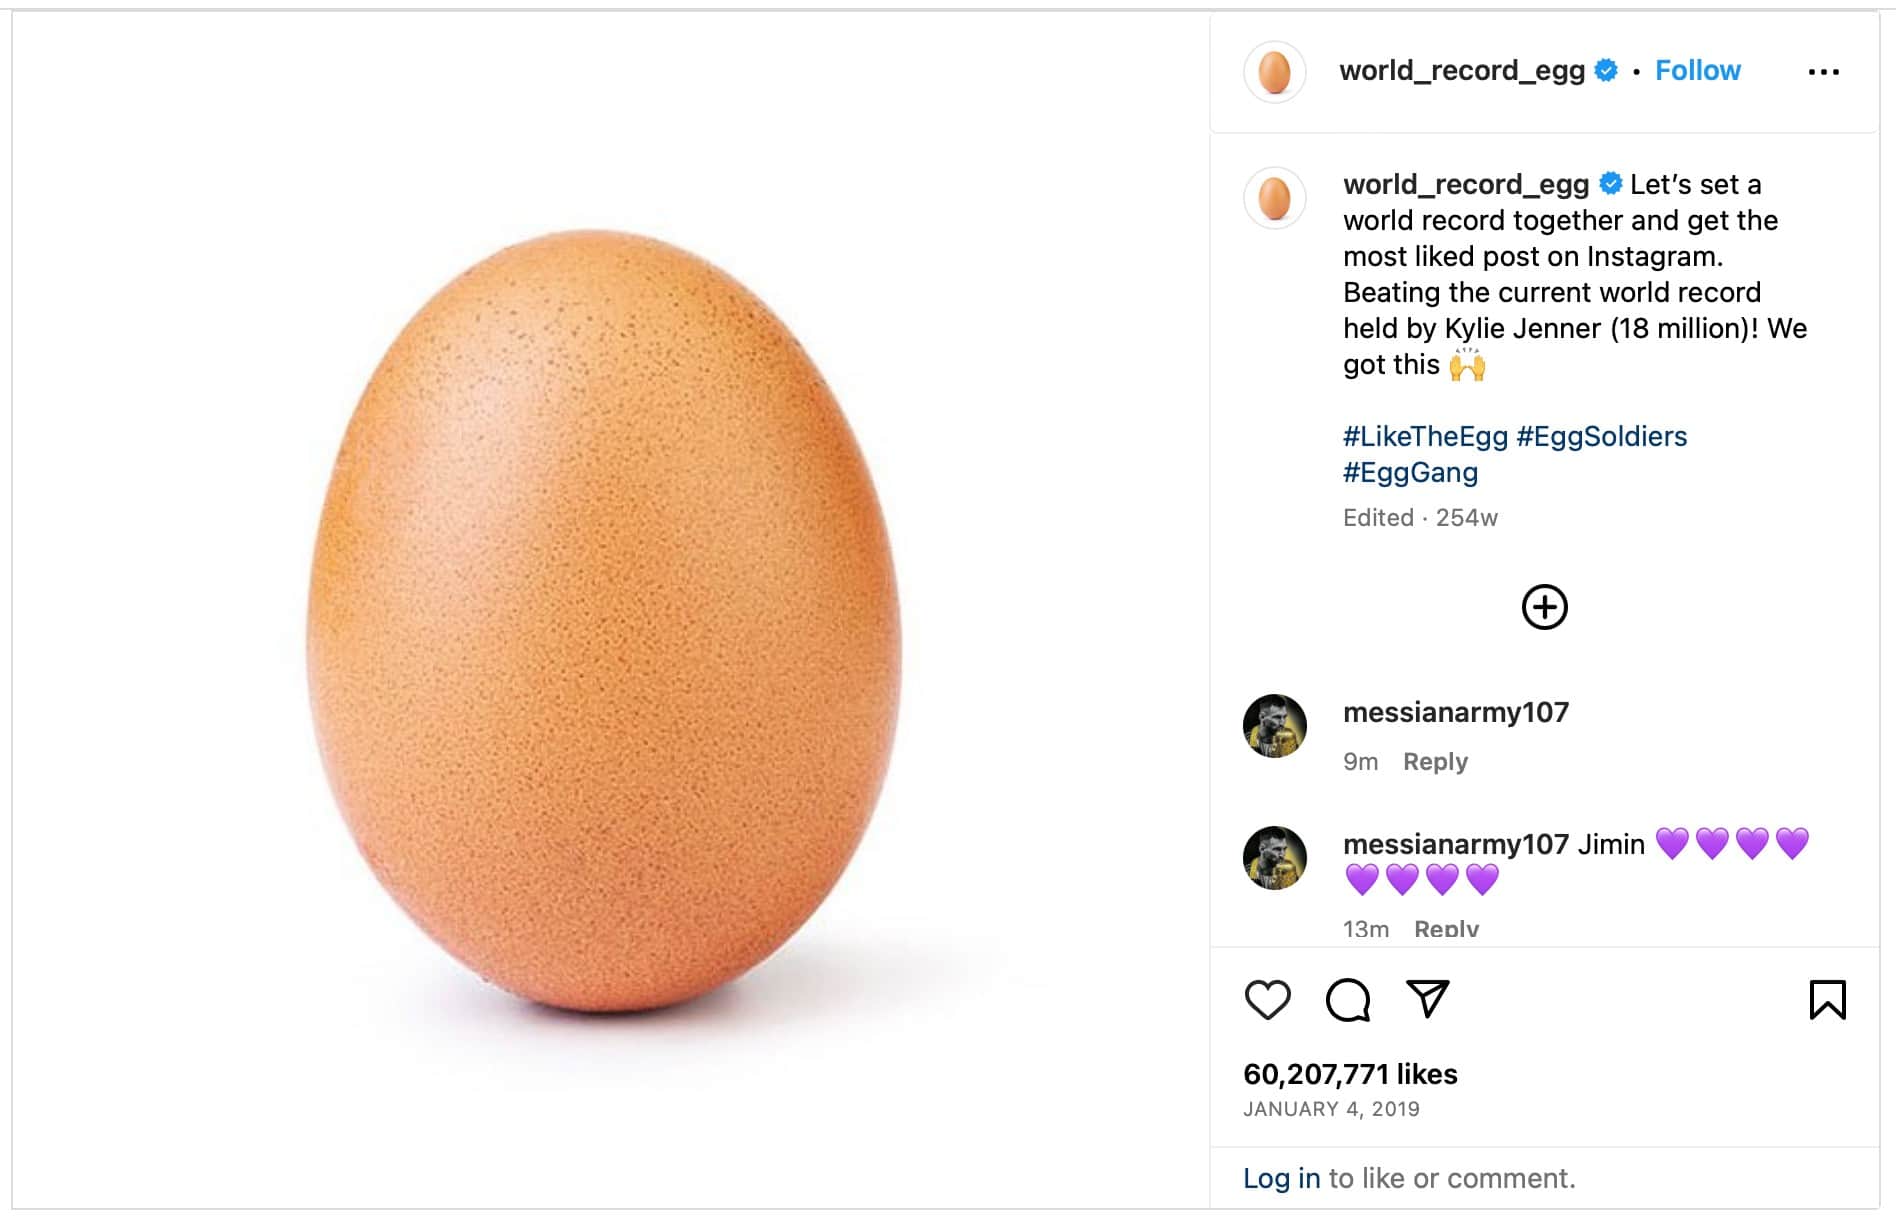 A record-breaking photo of an egg posted to Instagram.